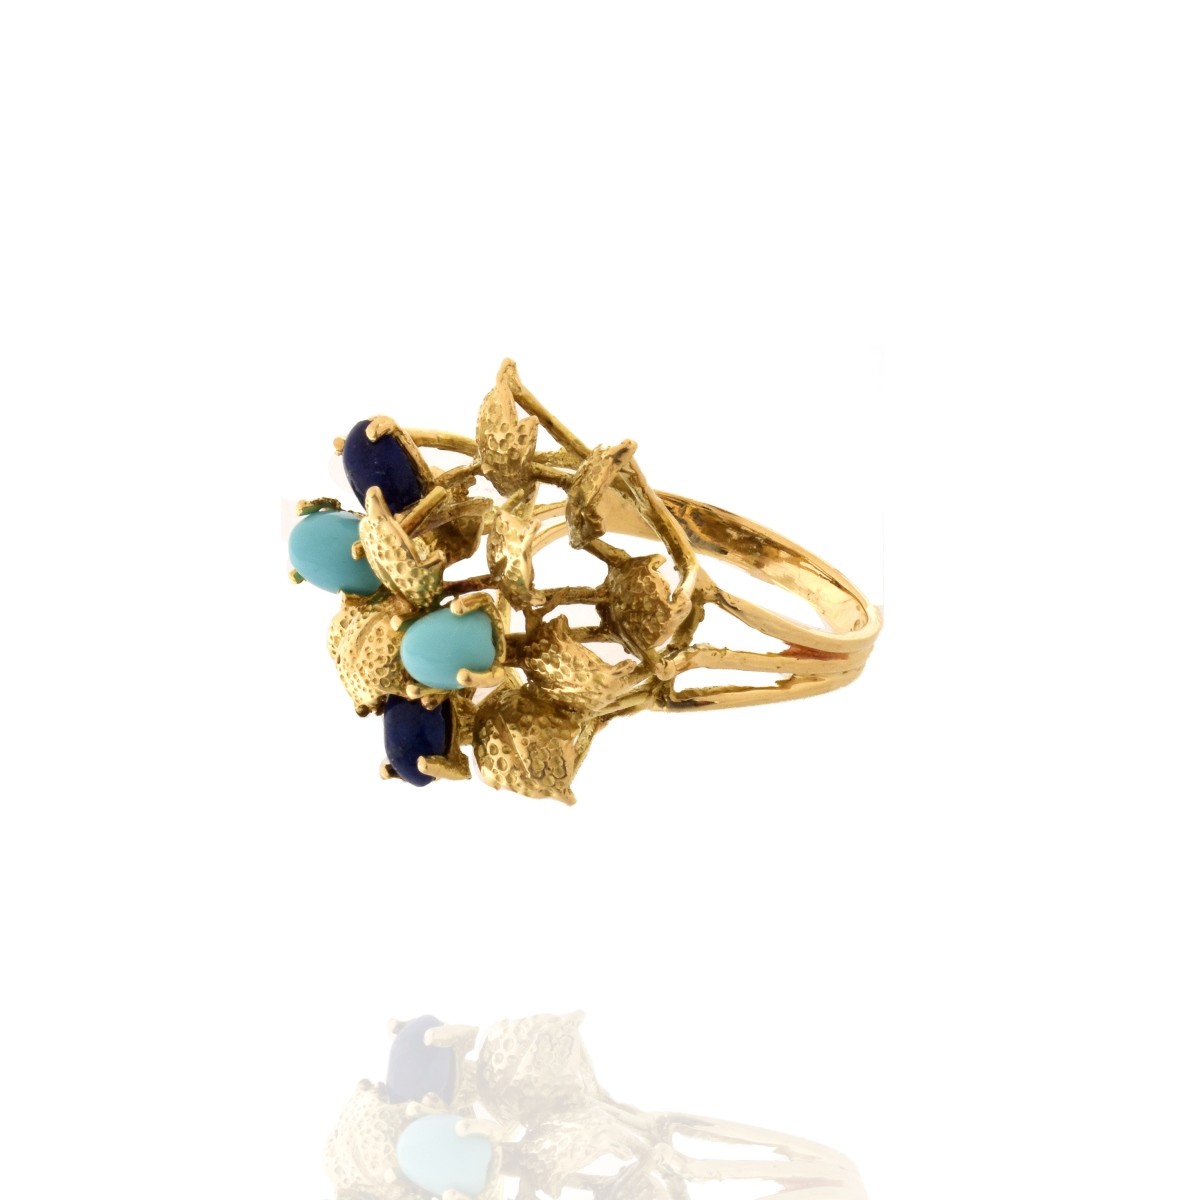 Turquoise, Lapis and 14K Ring